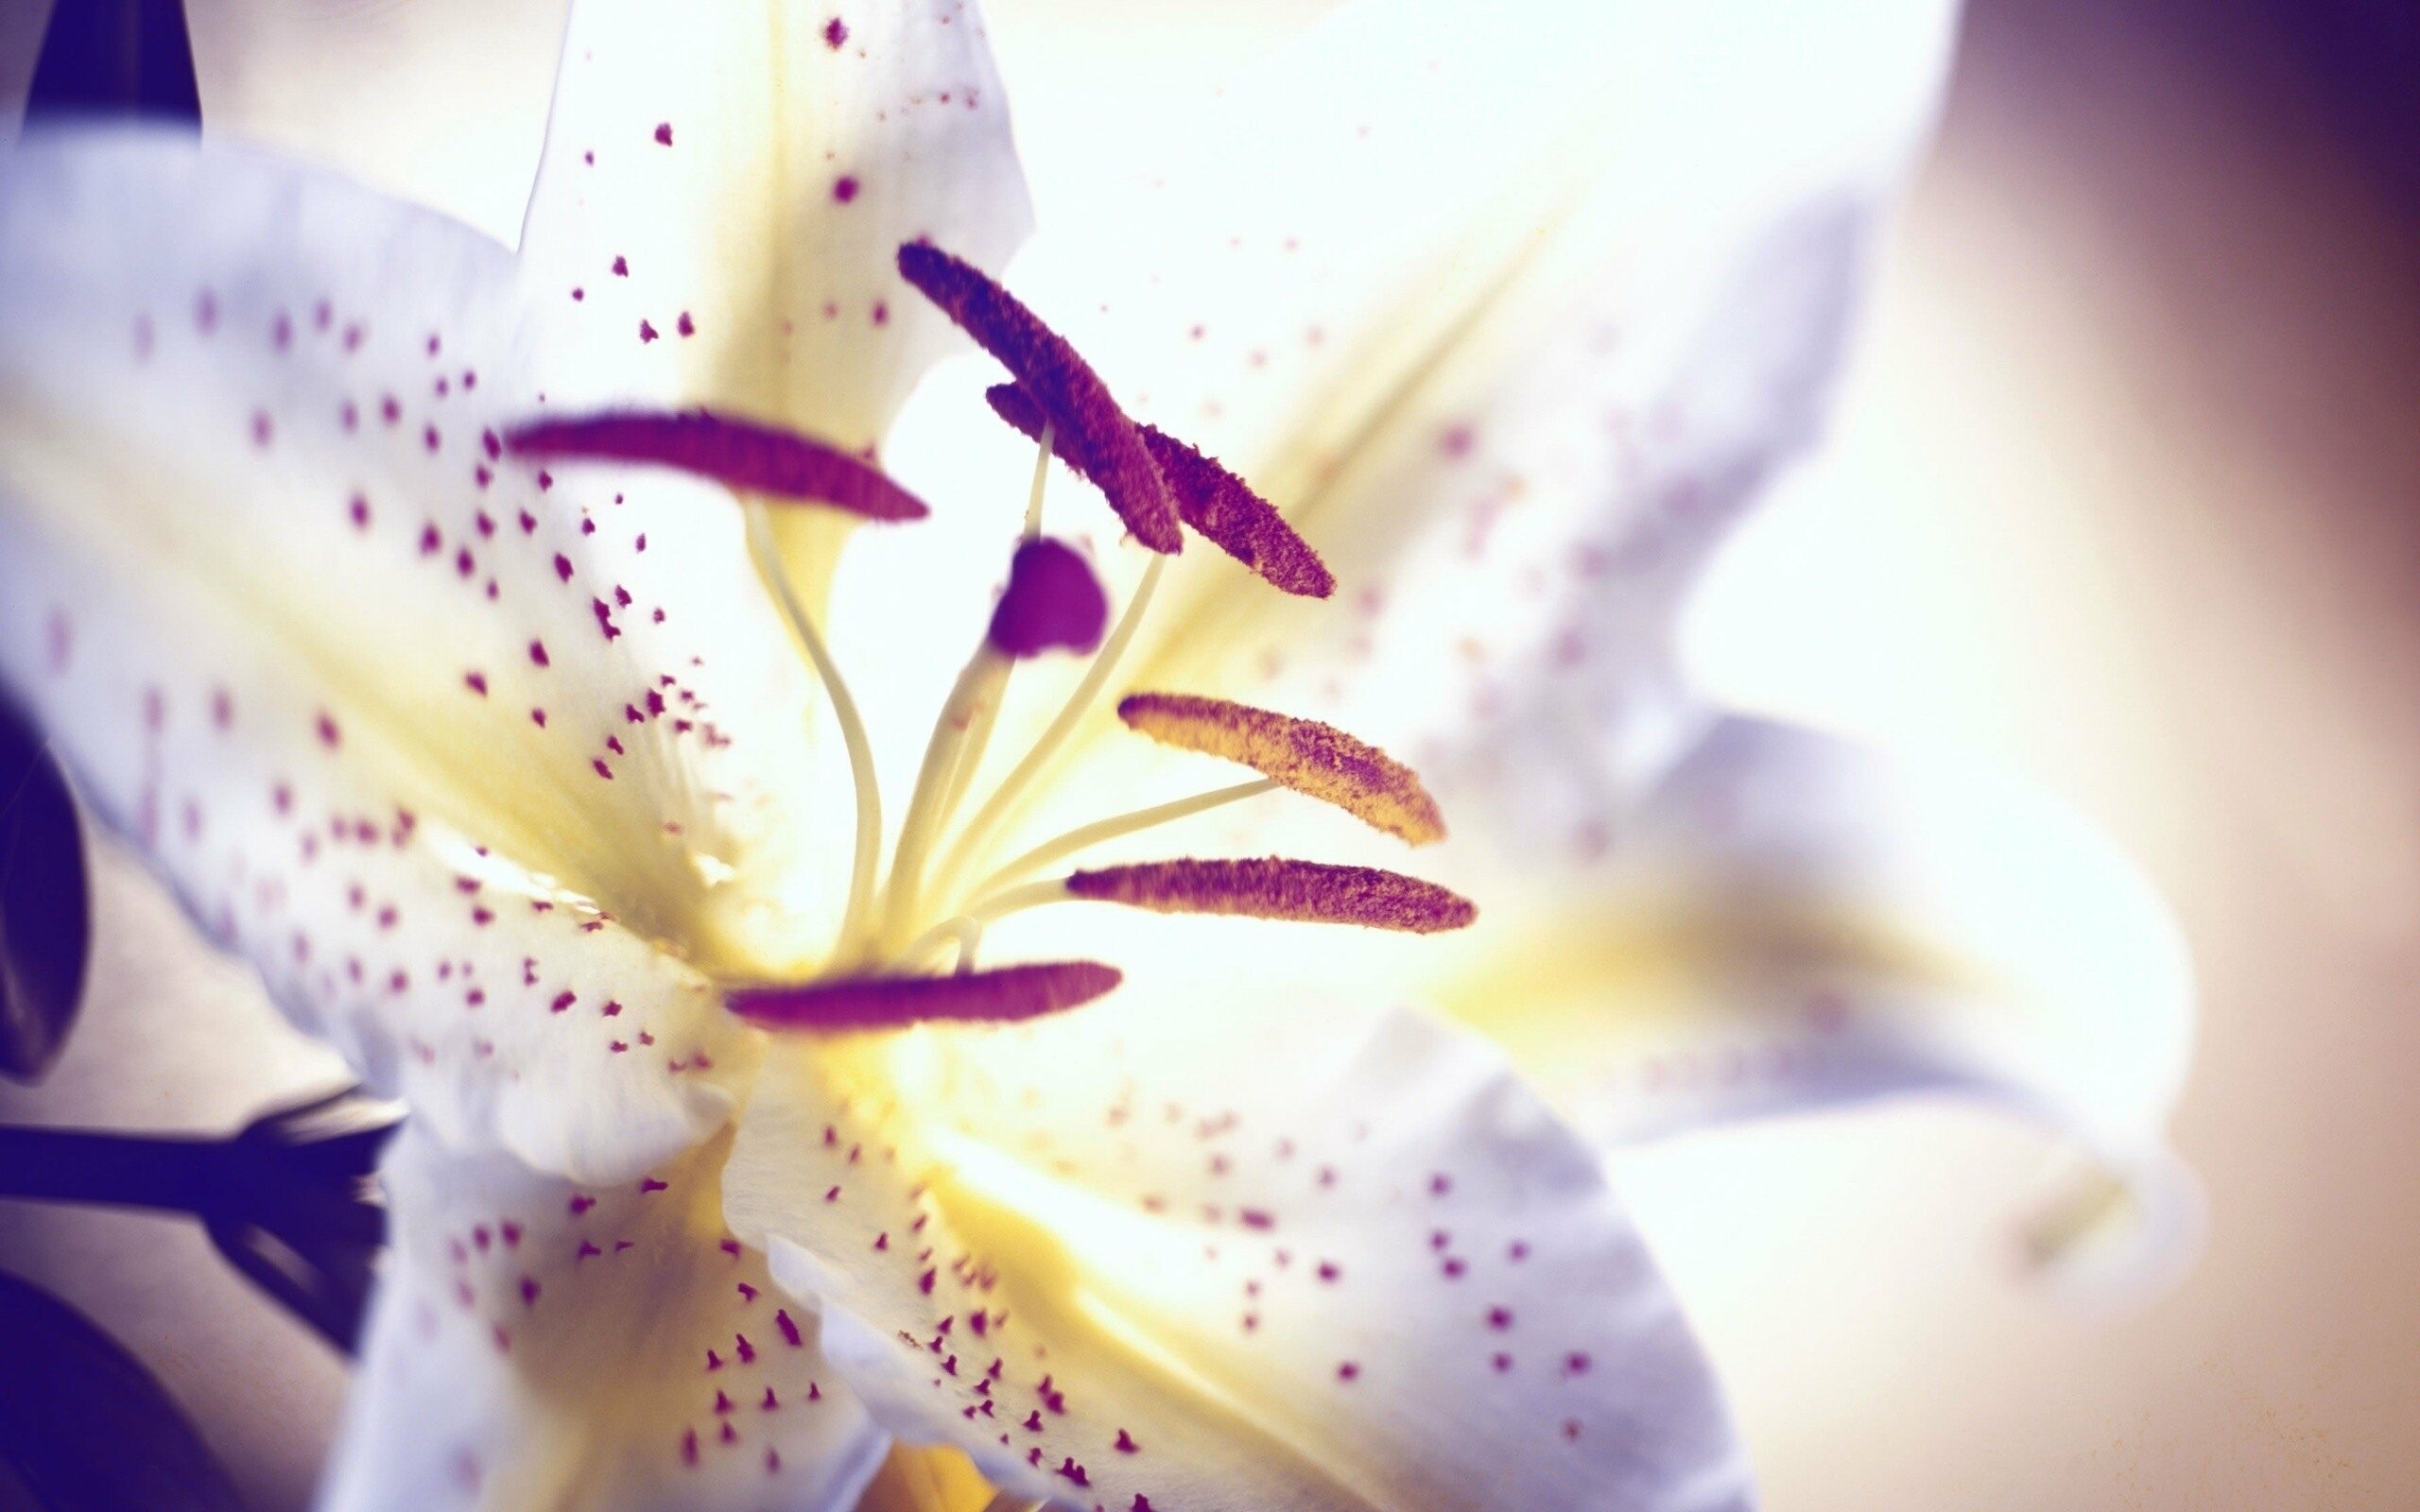 White lily flower, Zoey Anderson, Pure and elegant, Nature, 2560x1600 HD Desktop